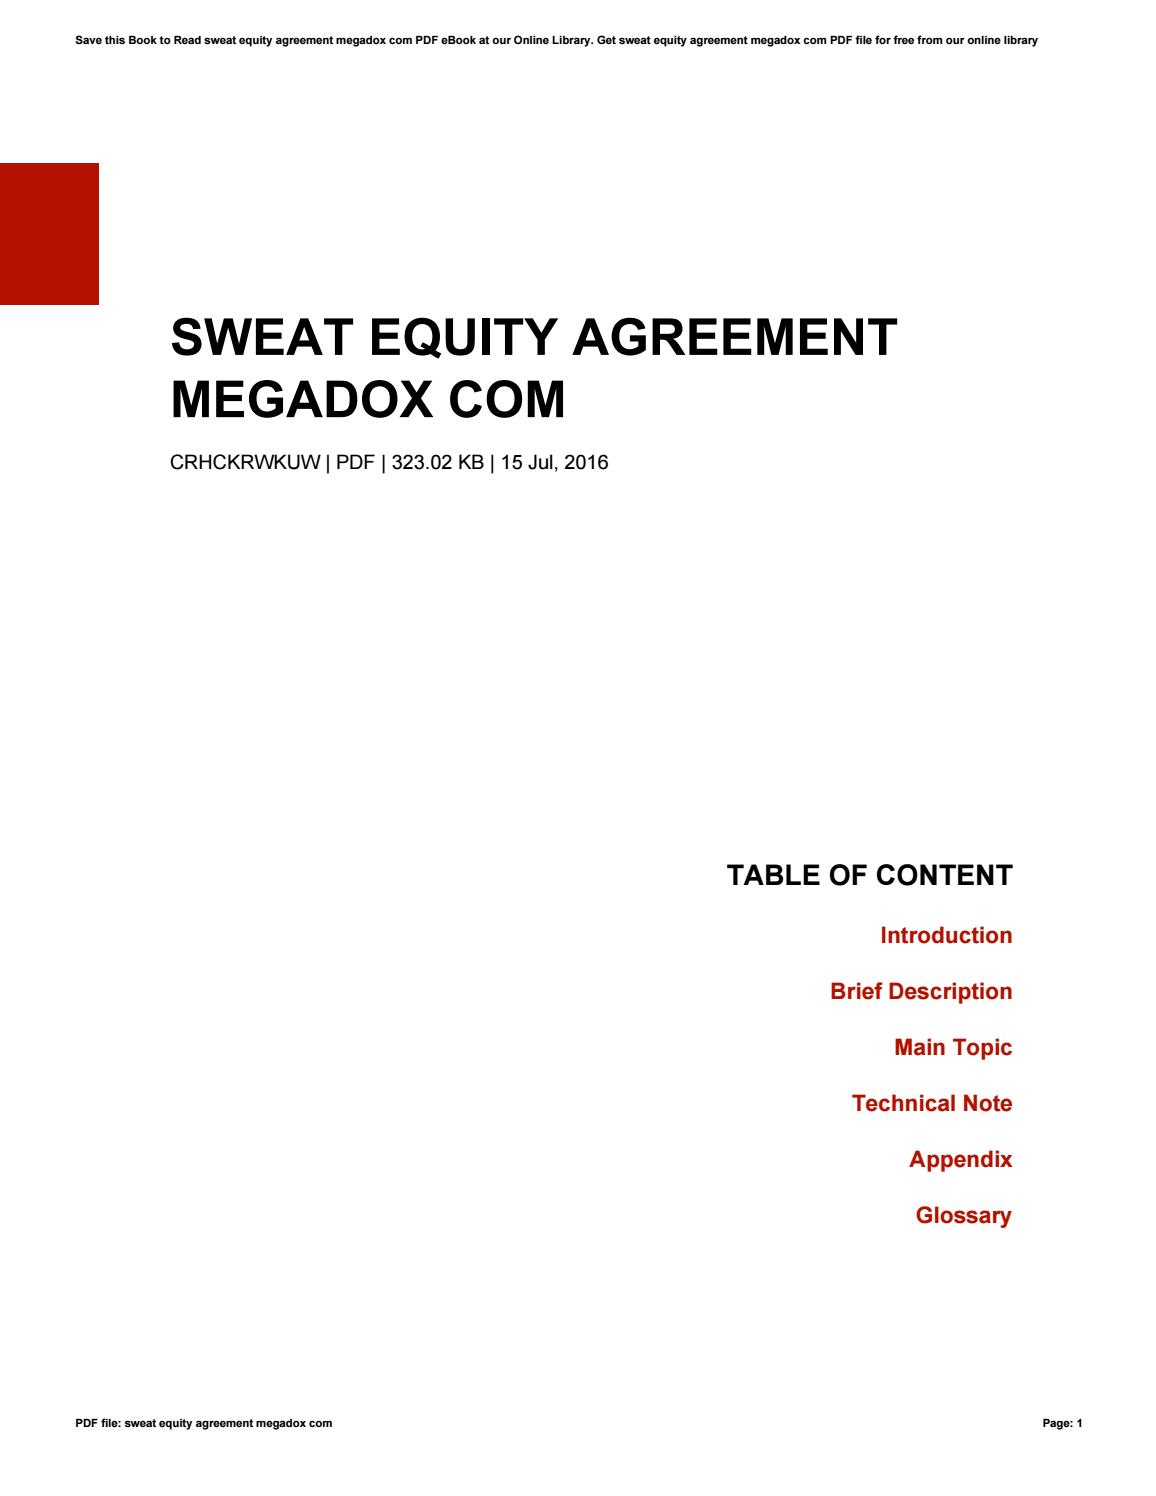 Sweat Equity Agreement Template Sweat Equity Agreement Megadox Com Theresaholford4092 Issuu